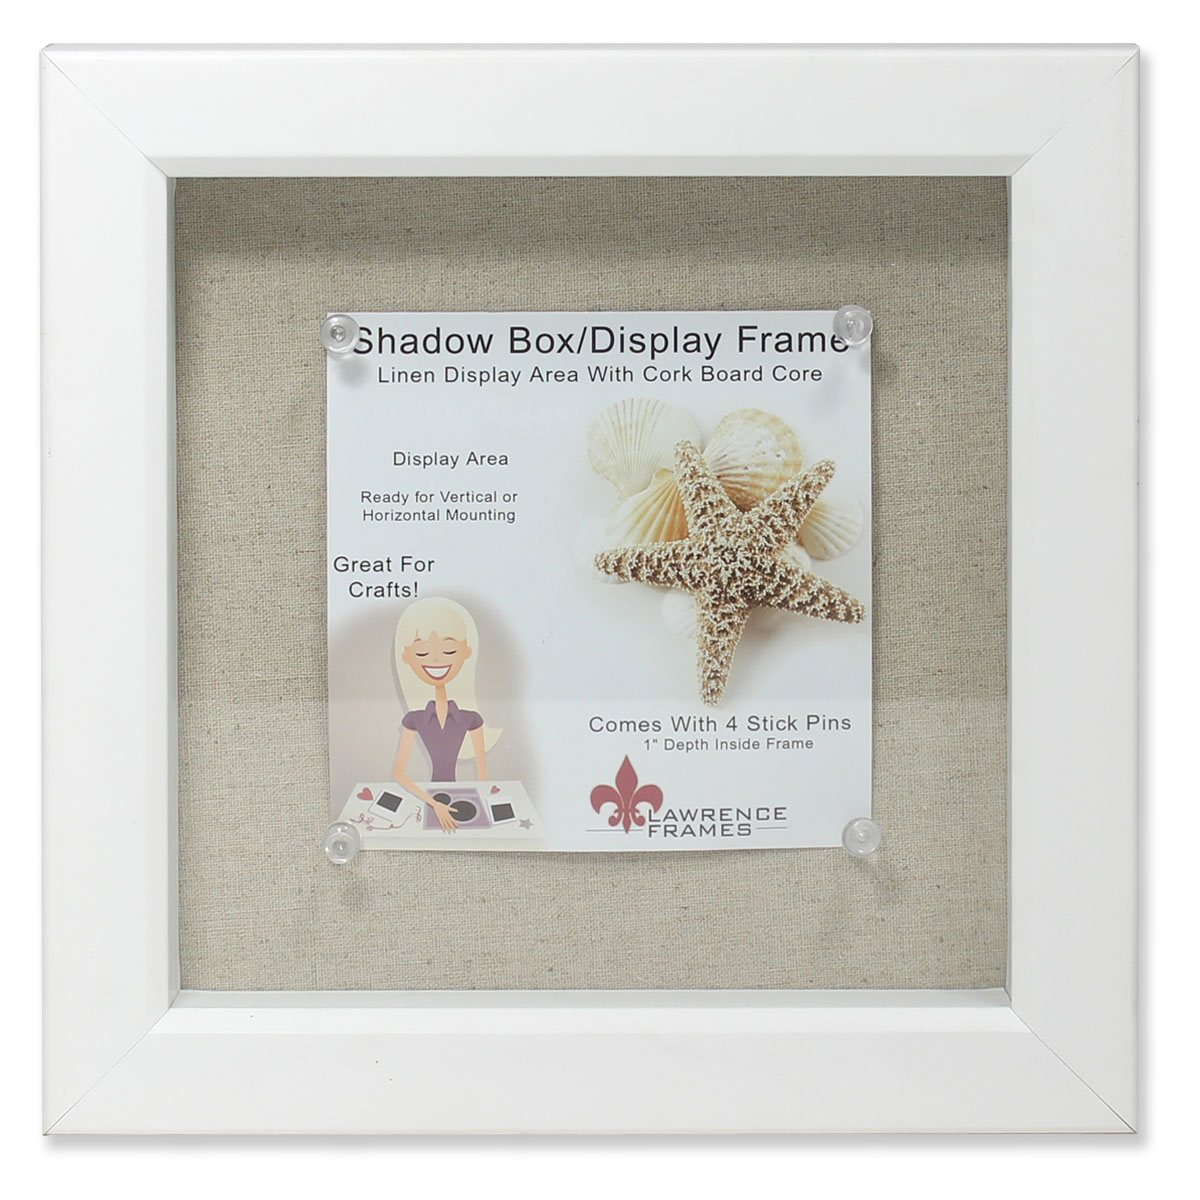 Lawrence Frames 8x8 White Shadow Box Frame - Linen Inner Display Board - image 1 of 3